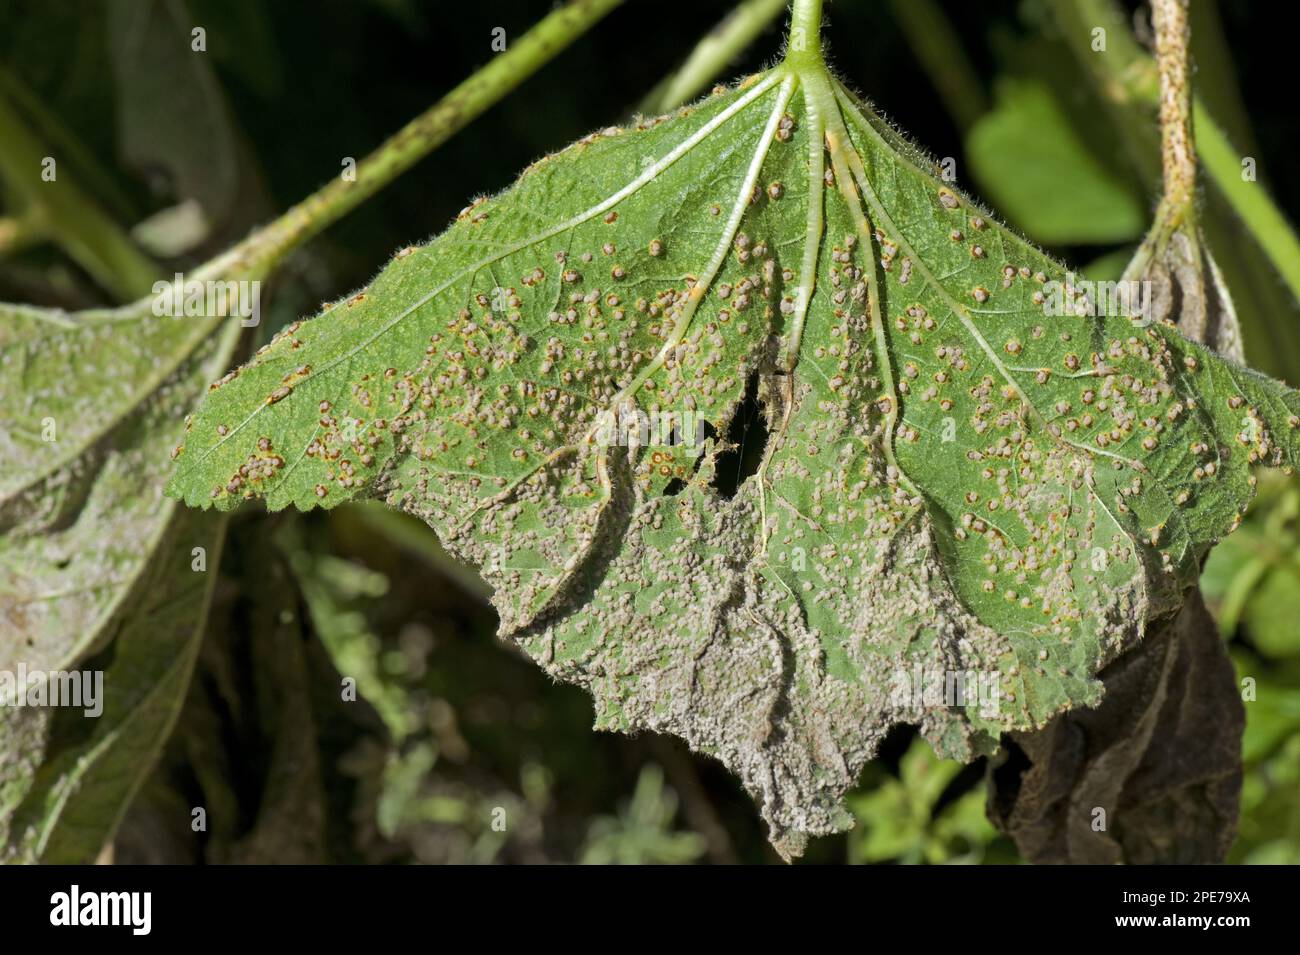 Holly rust, Puccinia malvacearum, severe damage and staining on the underside of a holly leaf Stock Photo